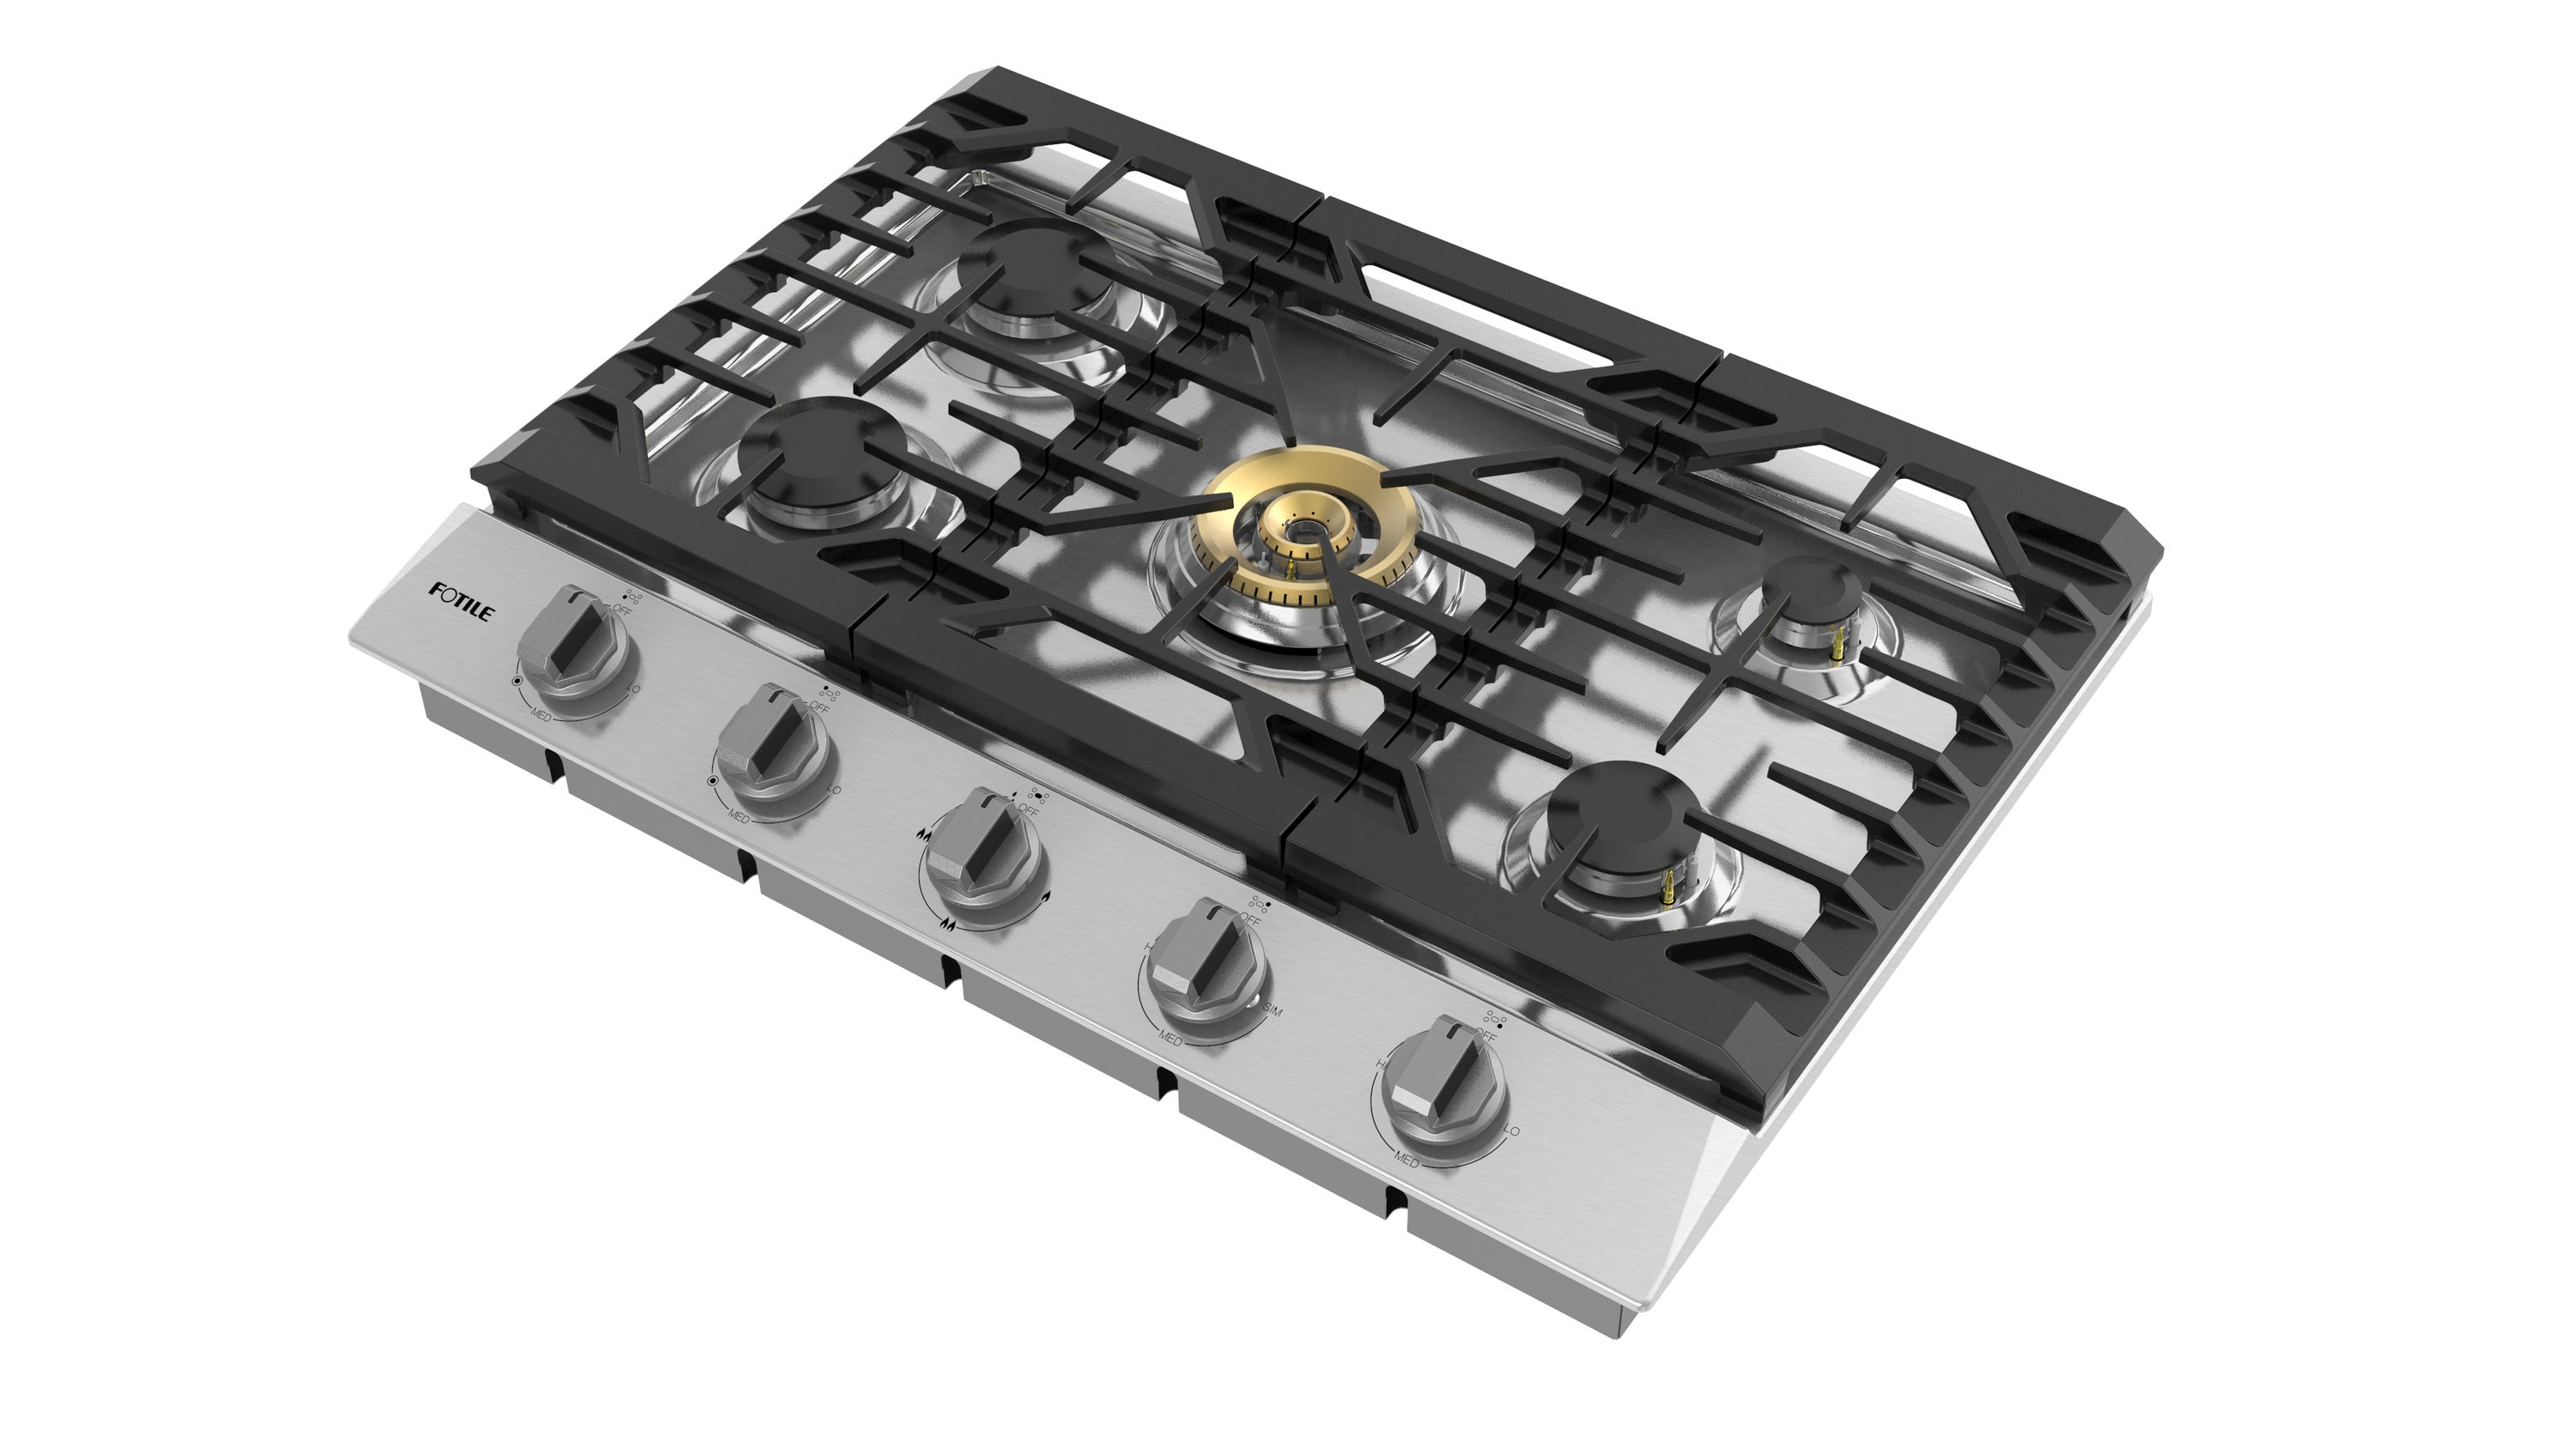 FOTILE Tri-Ring Professional Grade with 57K Total-BTU 30-in 5 Burners  Stainless Steel Gas Cooktop